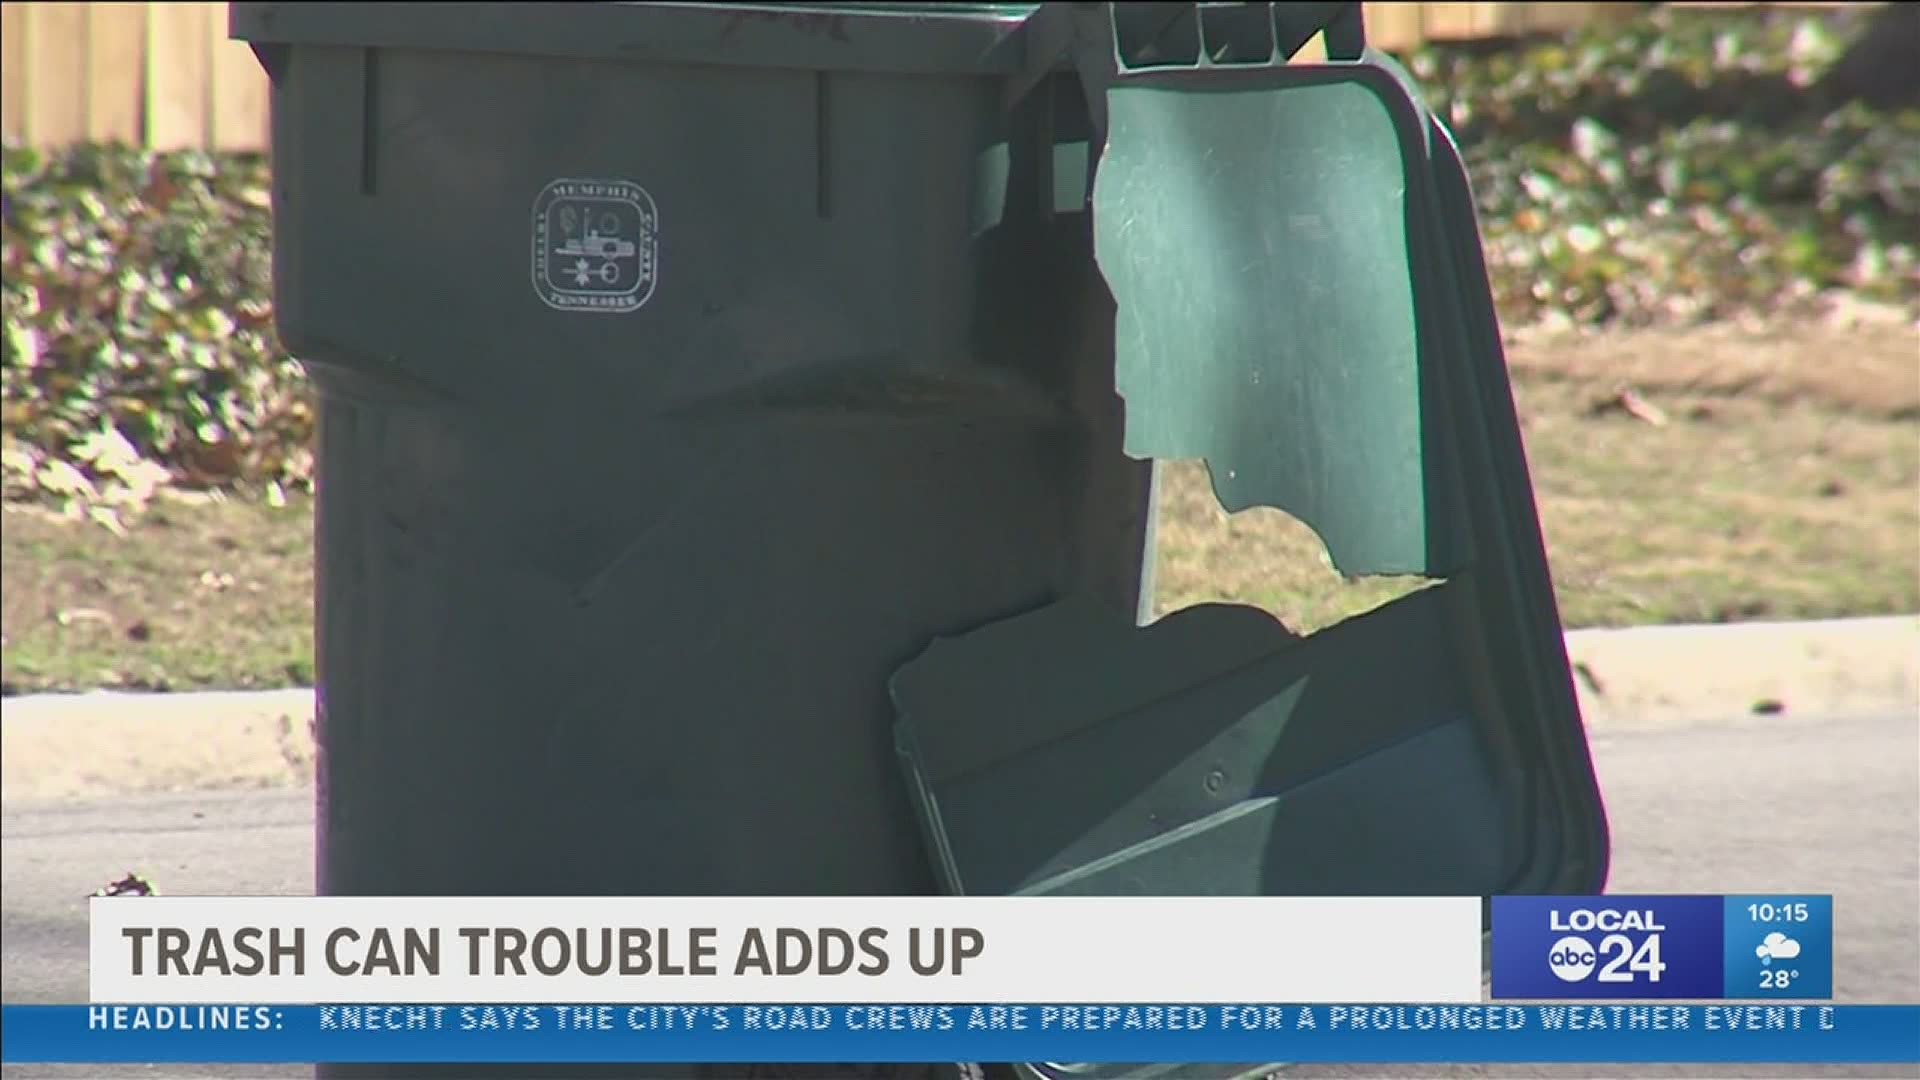 Why Are There So Many Broken Trash Bins In San Diego?